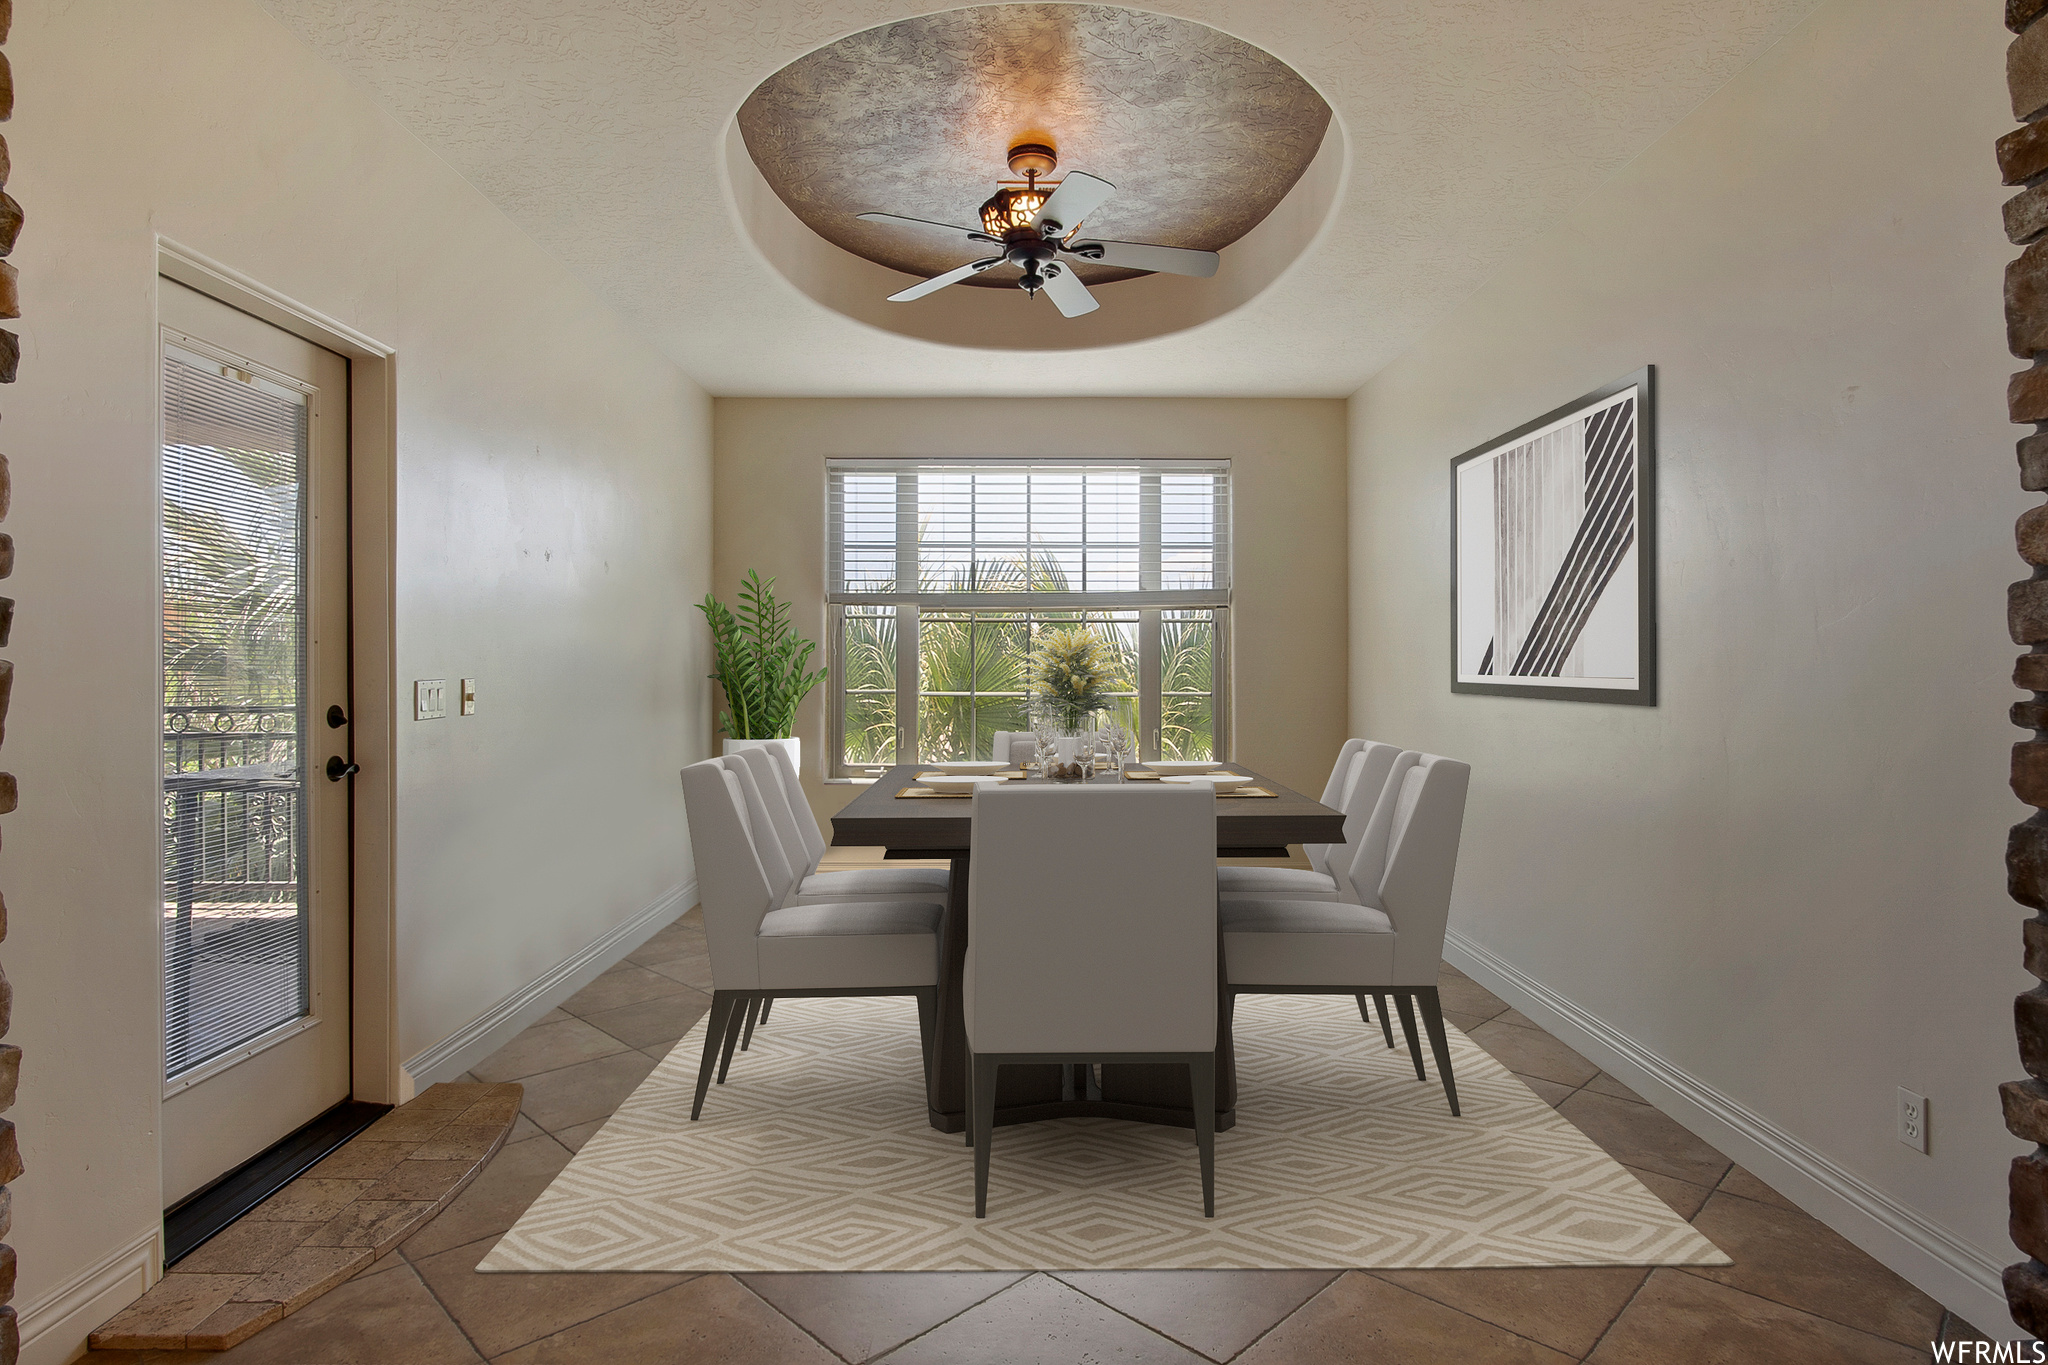 Semi-formal dining area, virtually staged.